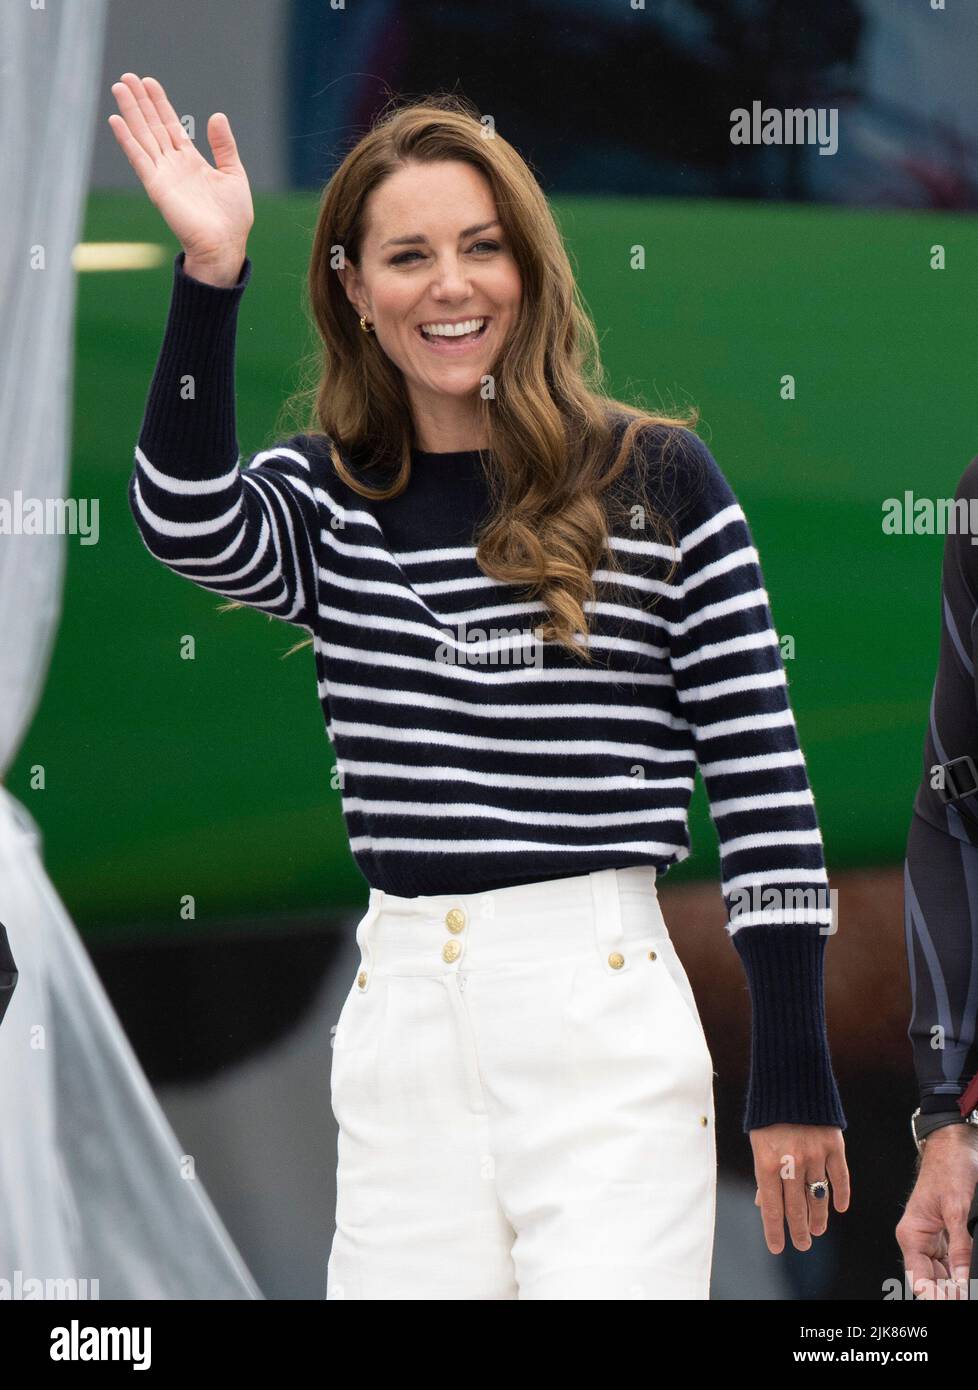 Plymouth, UK. 31 July, 2022.  Catherine, Duchess Of Cambridge visits the 1851 Trust and the Great Britain SailGP in Plymouth.  During the visit, the Duchess of Cambridge took part in activities educating young people about sustainability.  Credit: Anwar Hussein/Alamy Live News Stock Photo